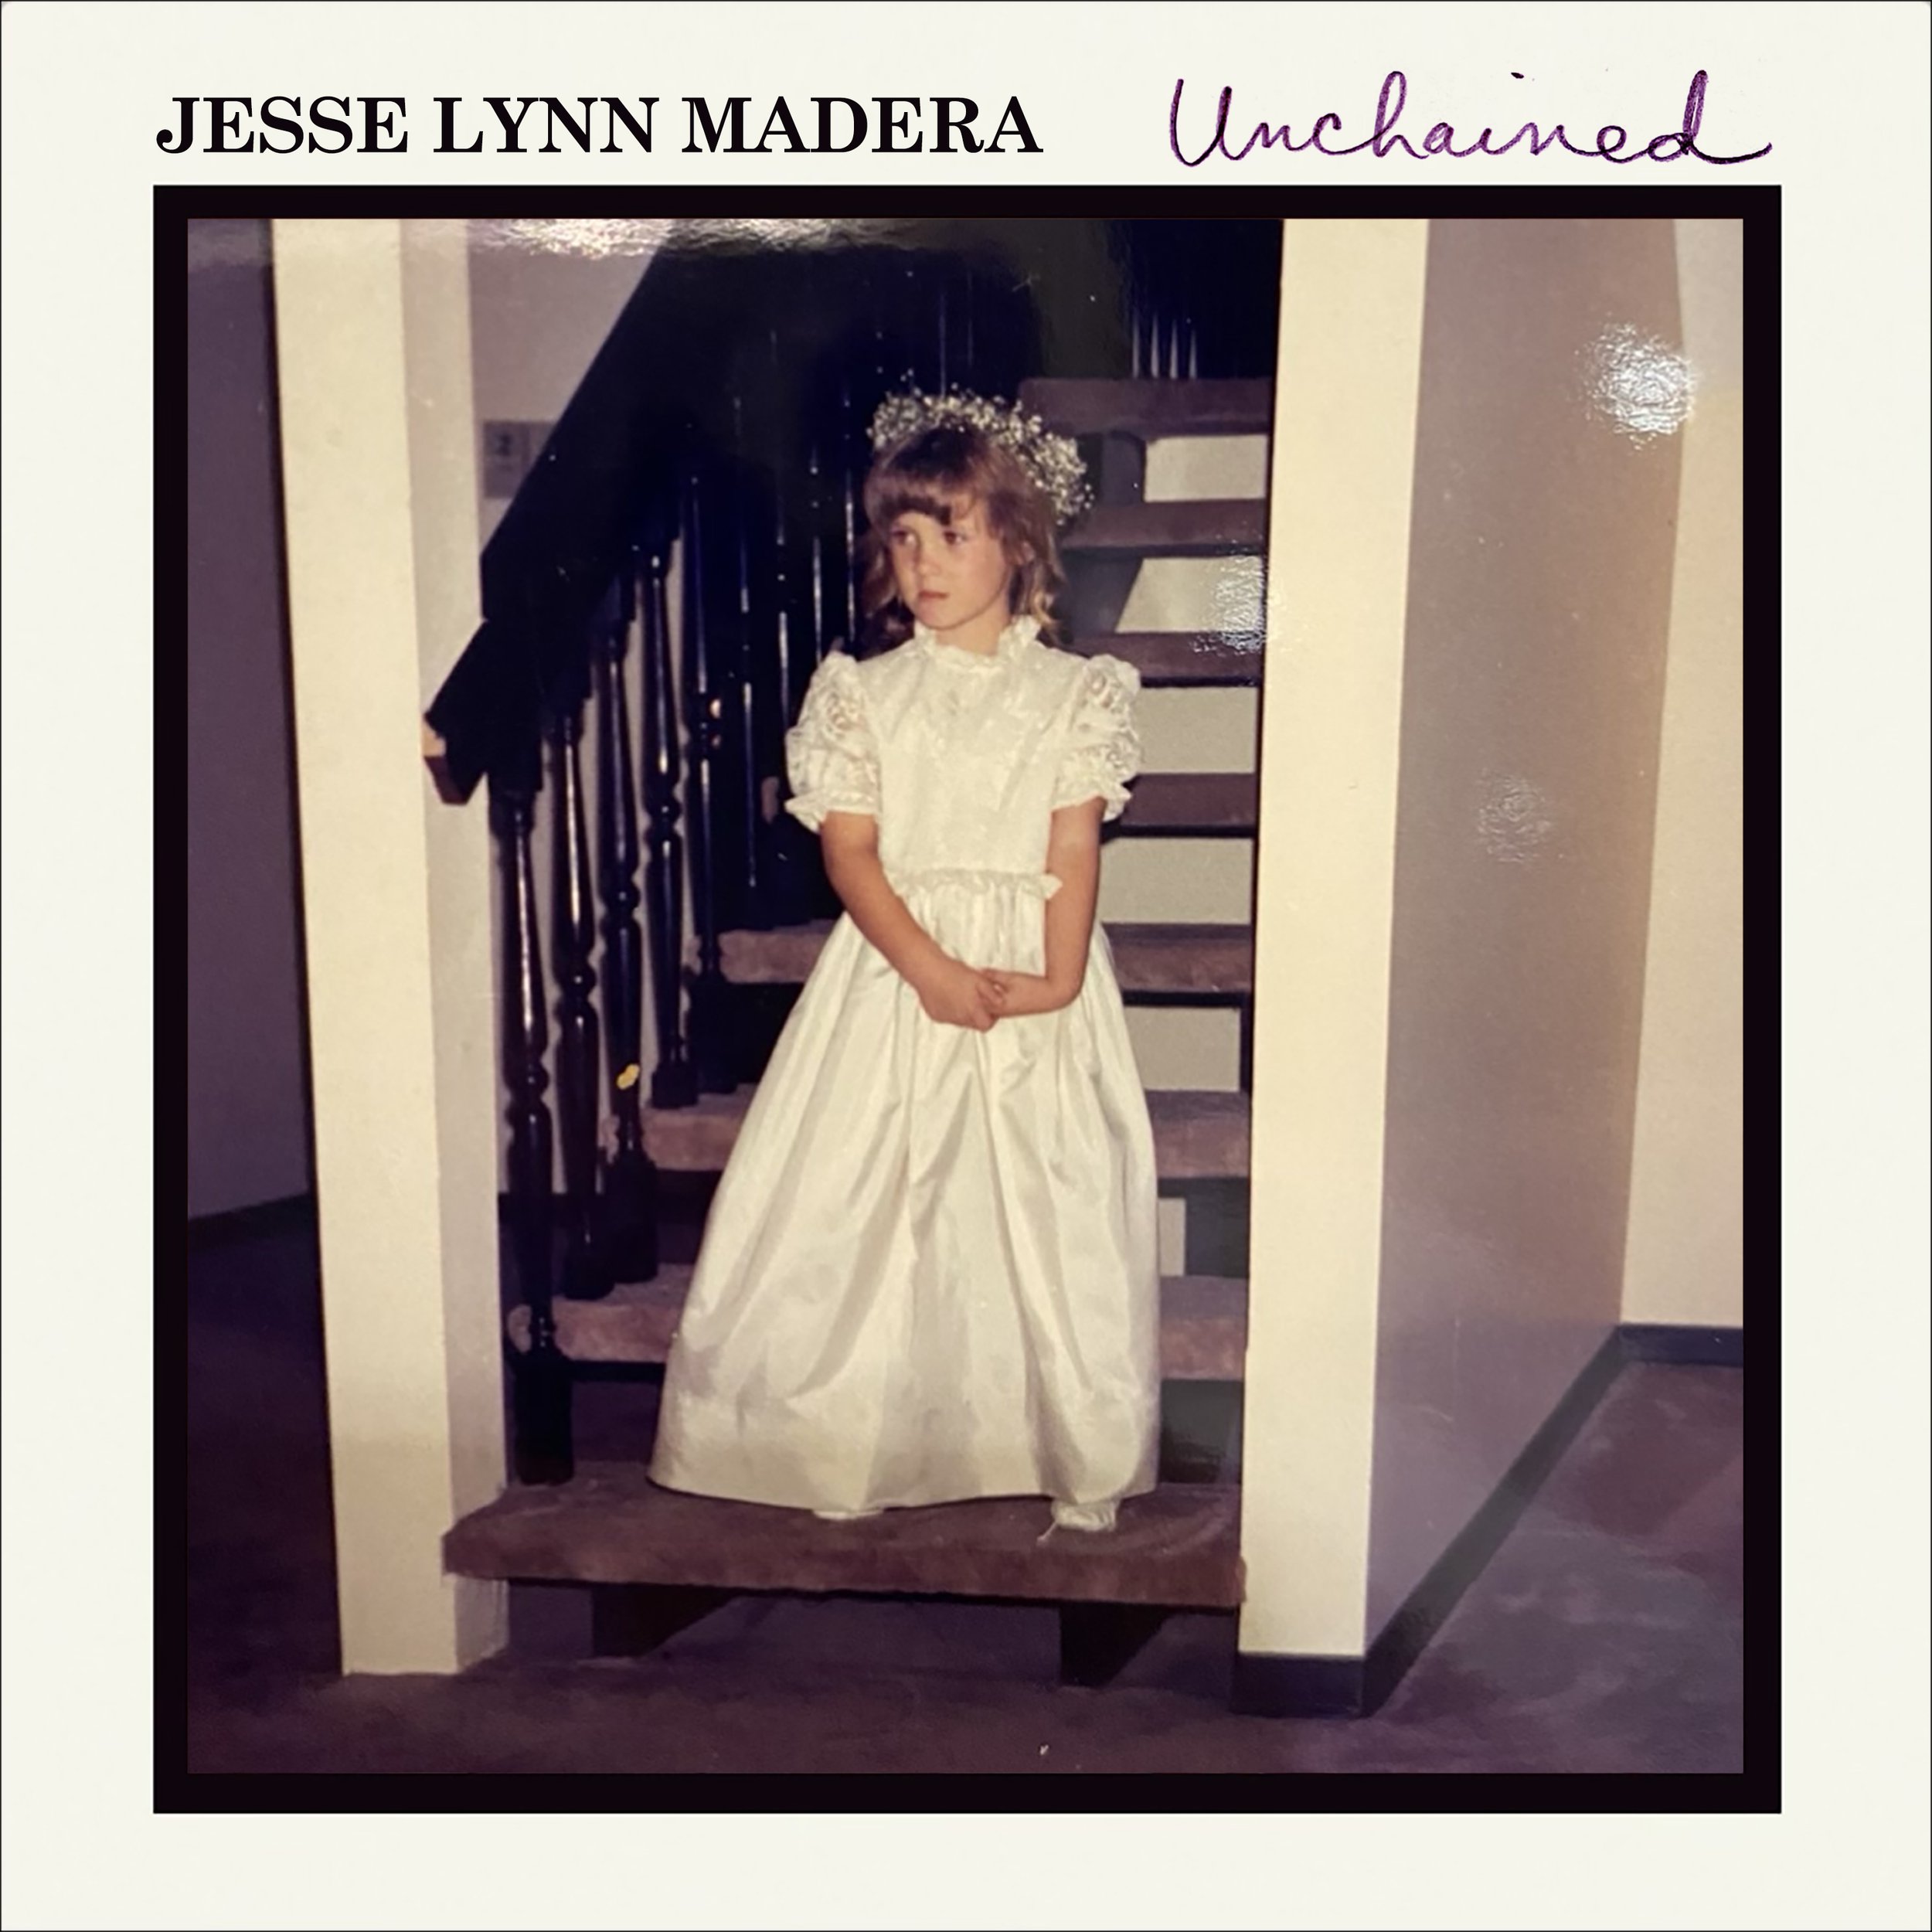 Unchained - Single Cover